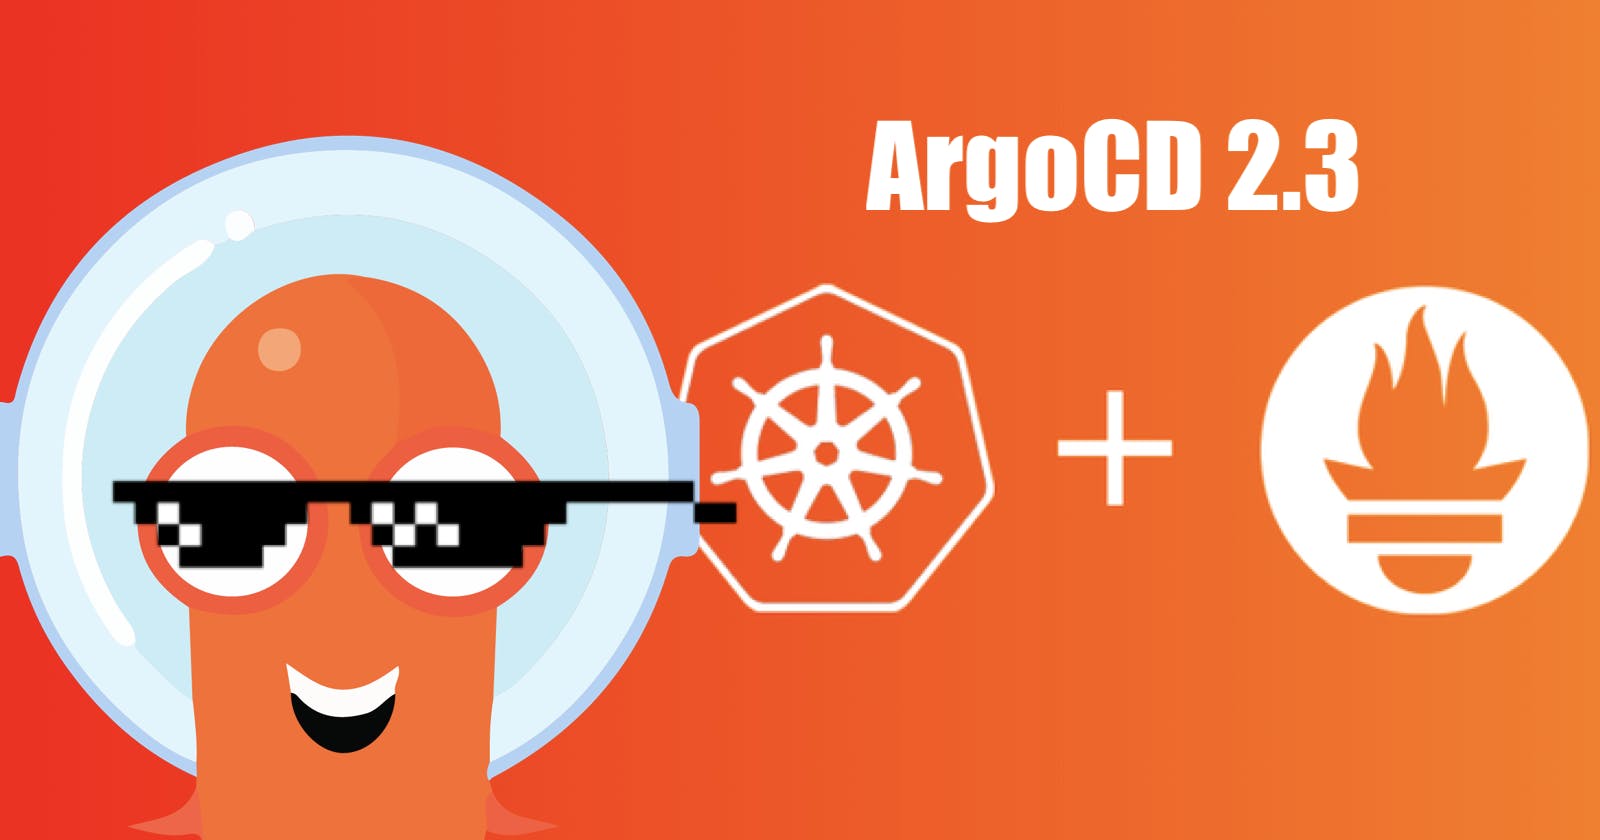 Kube-Prometheus-Stack And ArgoCD 2.3 - How to remove a workaround